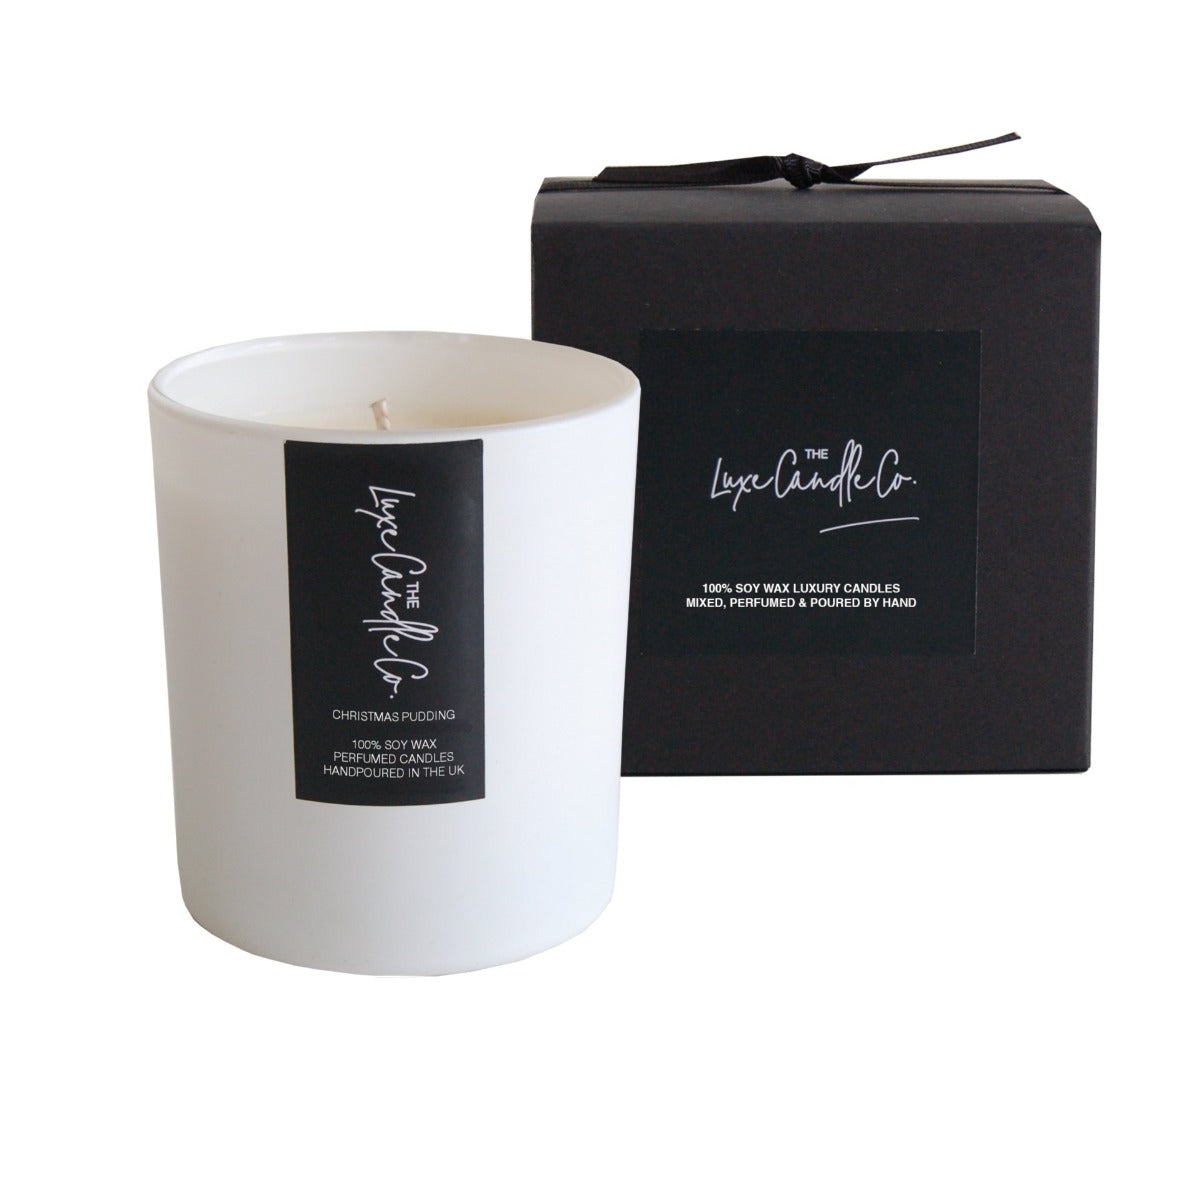 White Christmas Pudding scented soy wax candle | by The Luxe Candle Co